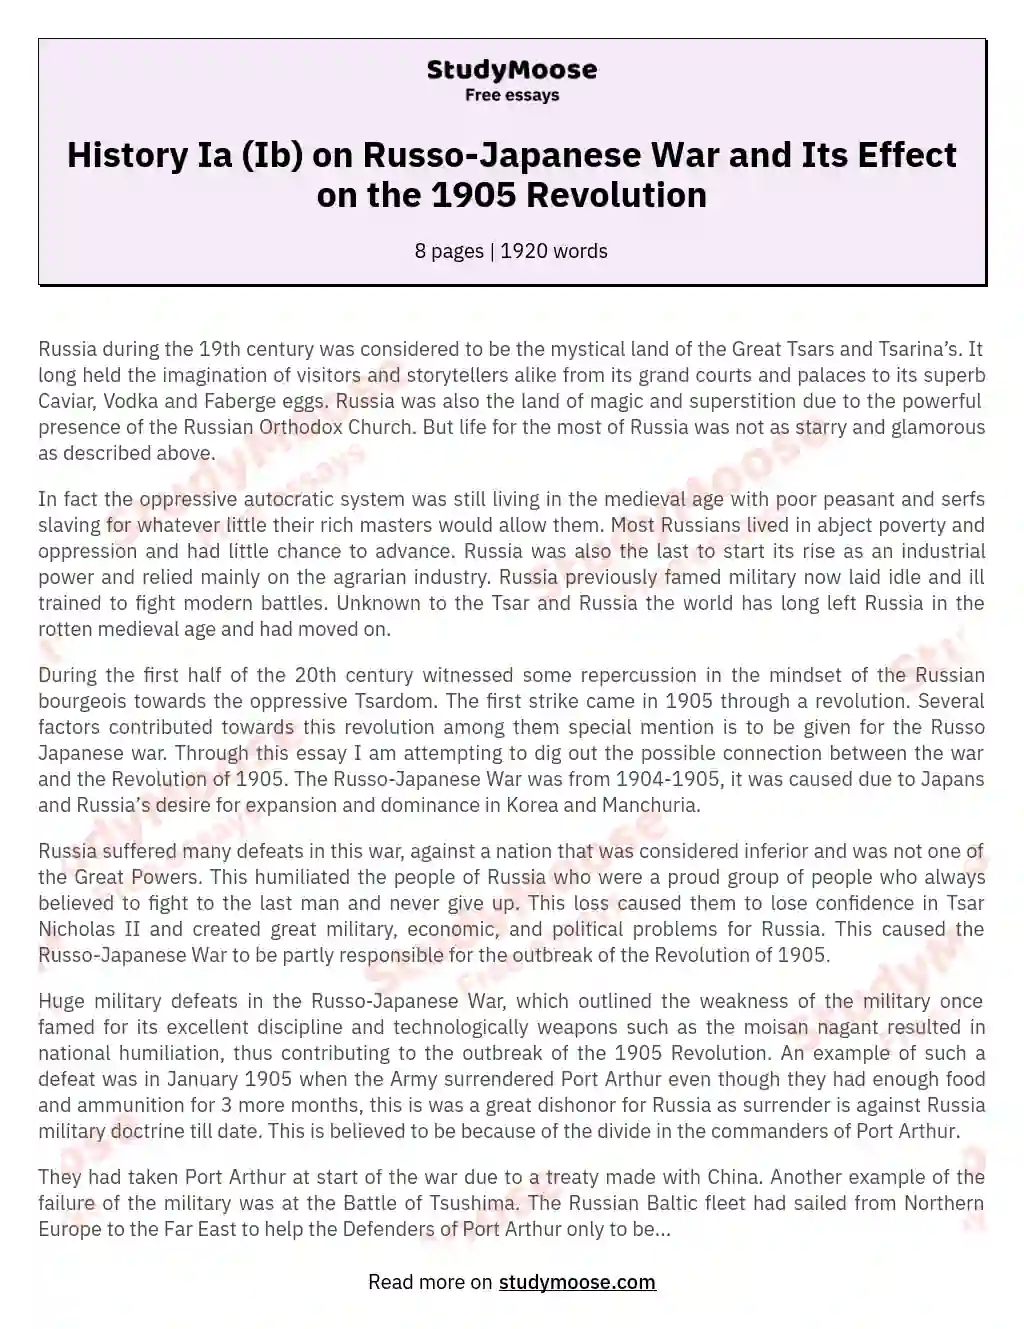 History Ia (Ib) on Russo-Japanese War and Its Effect on the 1905 Revolution essay